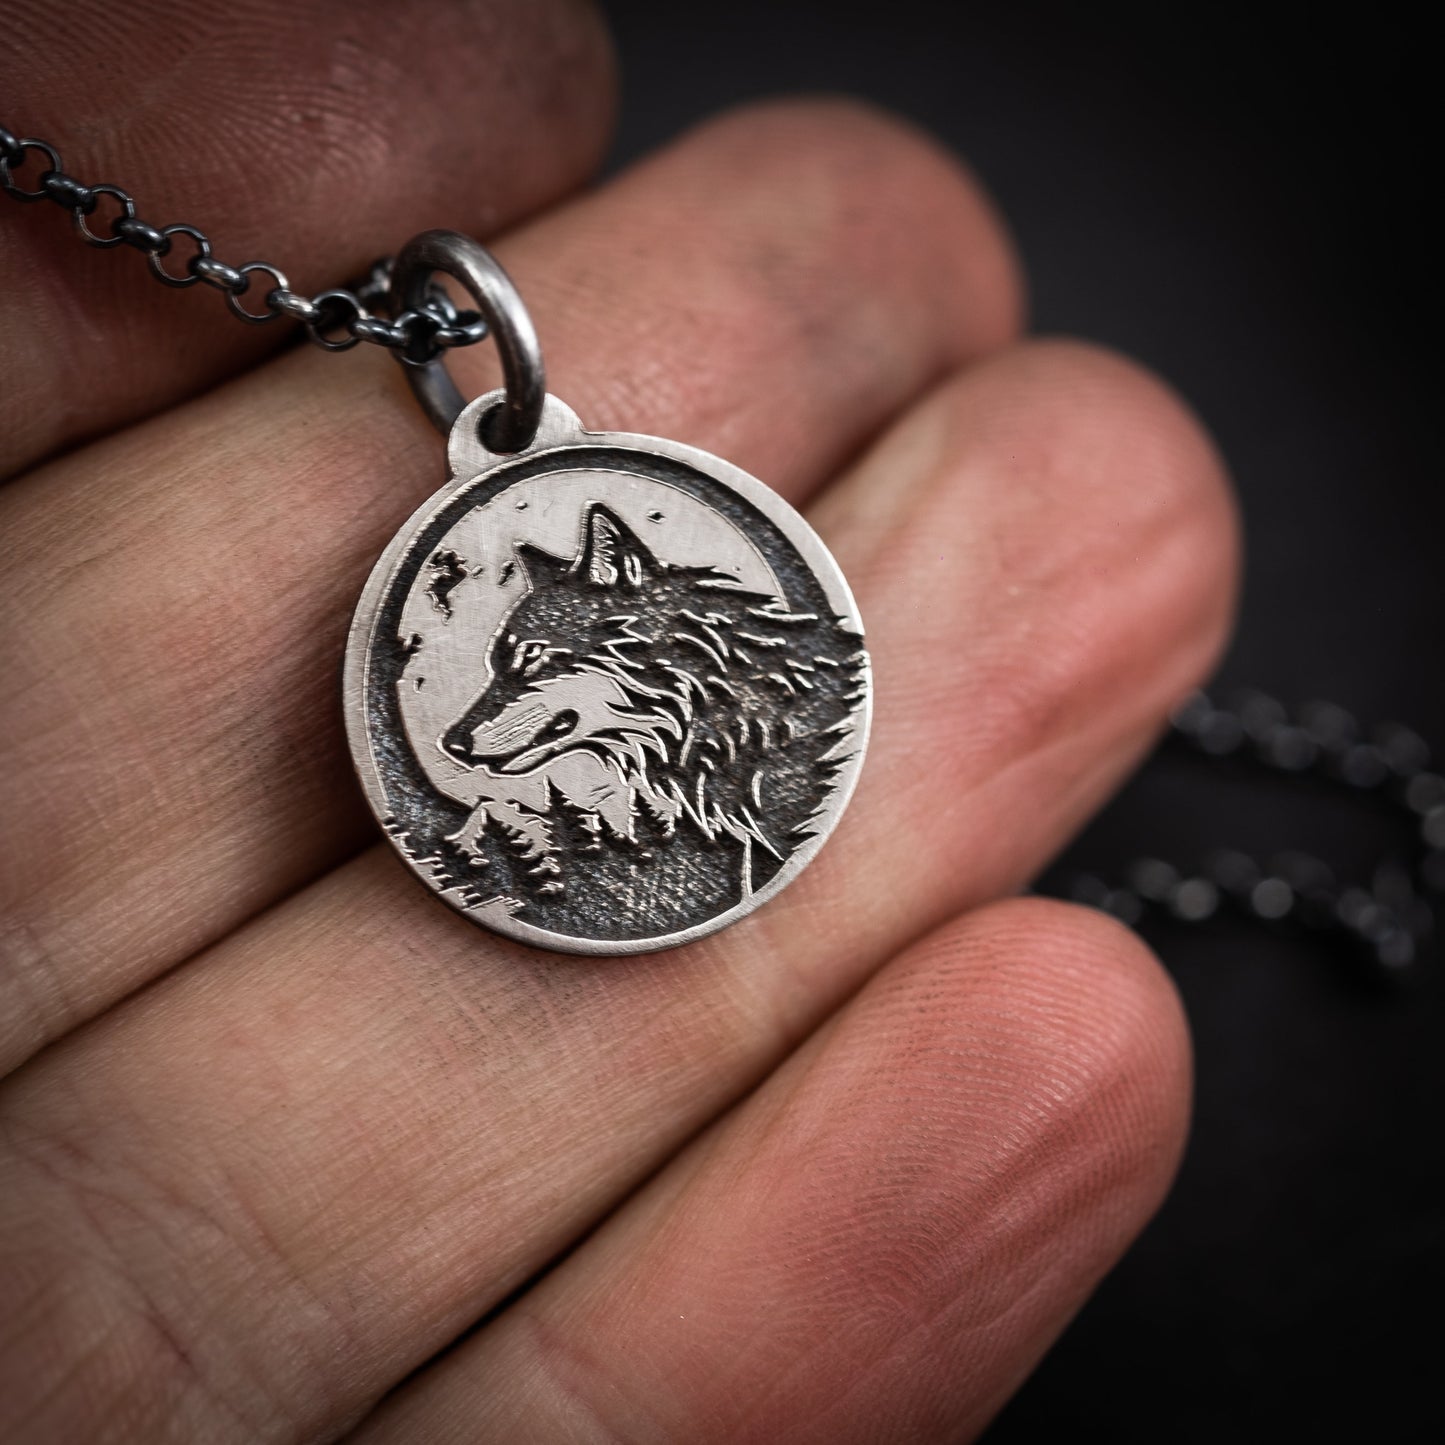 Silver Wolf And moon pendant necklace, Nature animal handmade jewelry, mens forest necklace, personalized engraved jewelry, mens gift